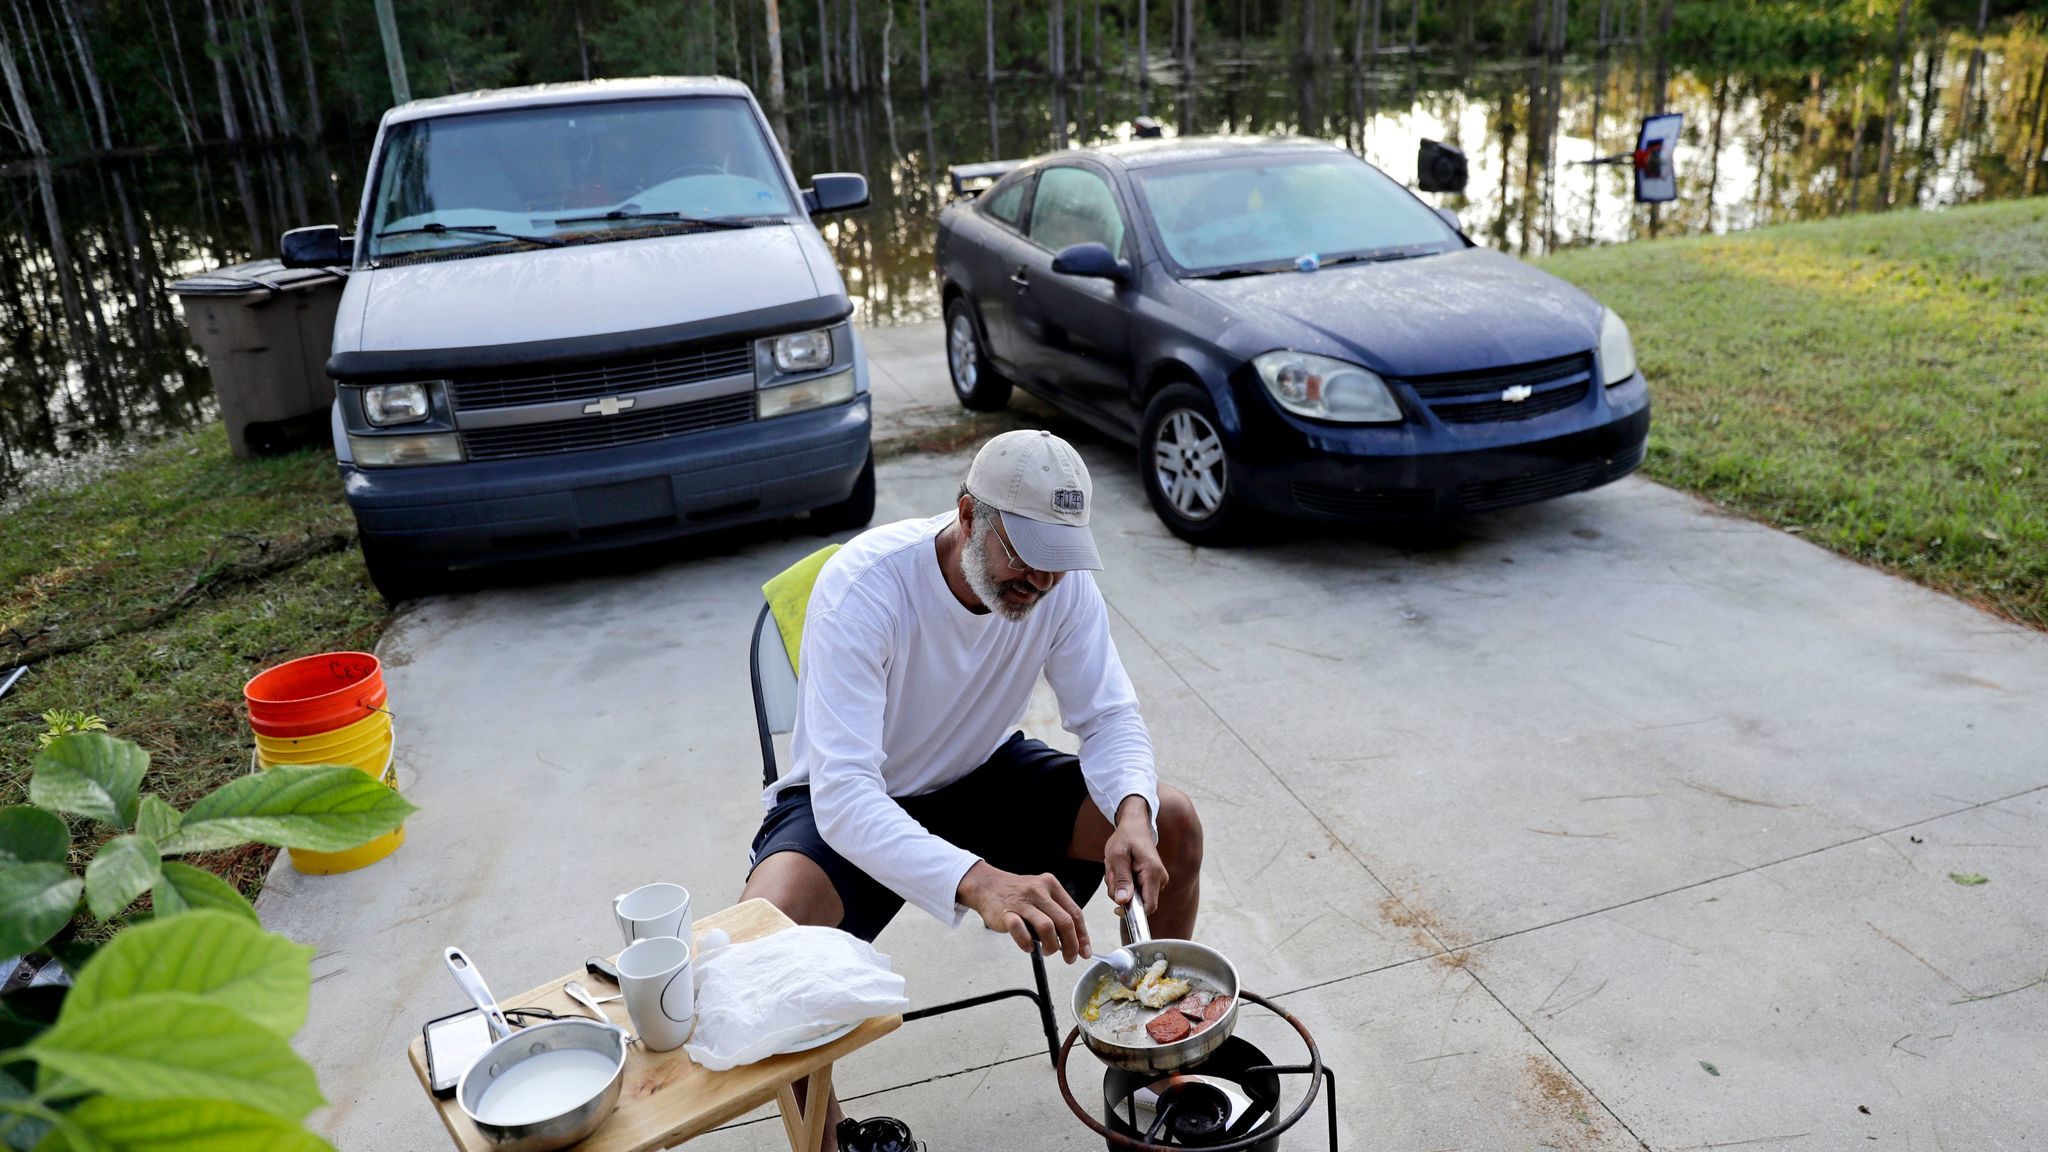 With his Fort Myers, Fla., neighborhood flooded, Cesar De La Cruz makes breakfast Sept. 12 on a propane stove in his driveway.